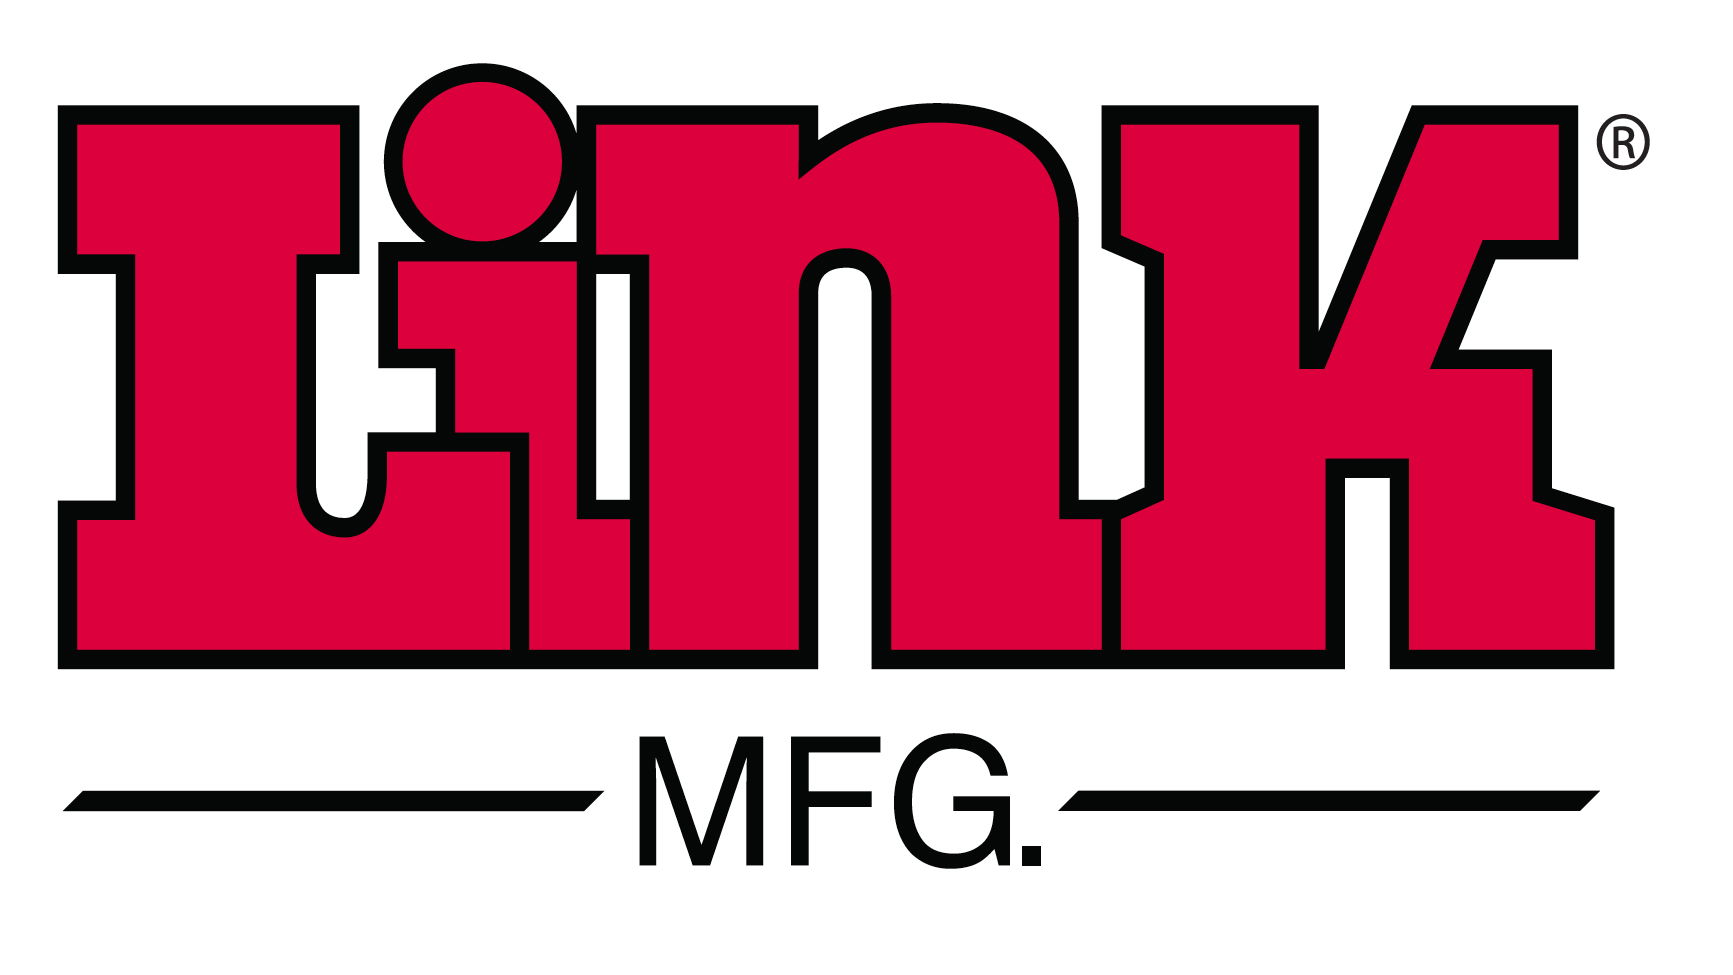 Link Mfg., Ltd. is the leader in specialty-engineered suspensions, suspension controls and air management products and a Tier-1 supplier to major heavy-duty commercial truck manufacturers.